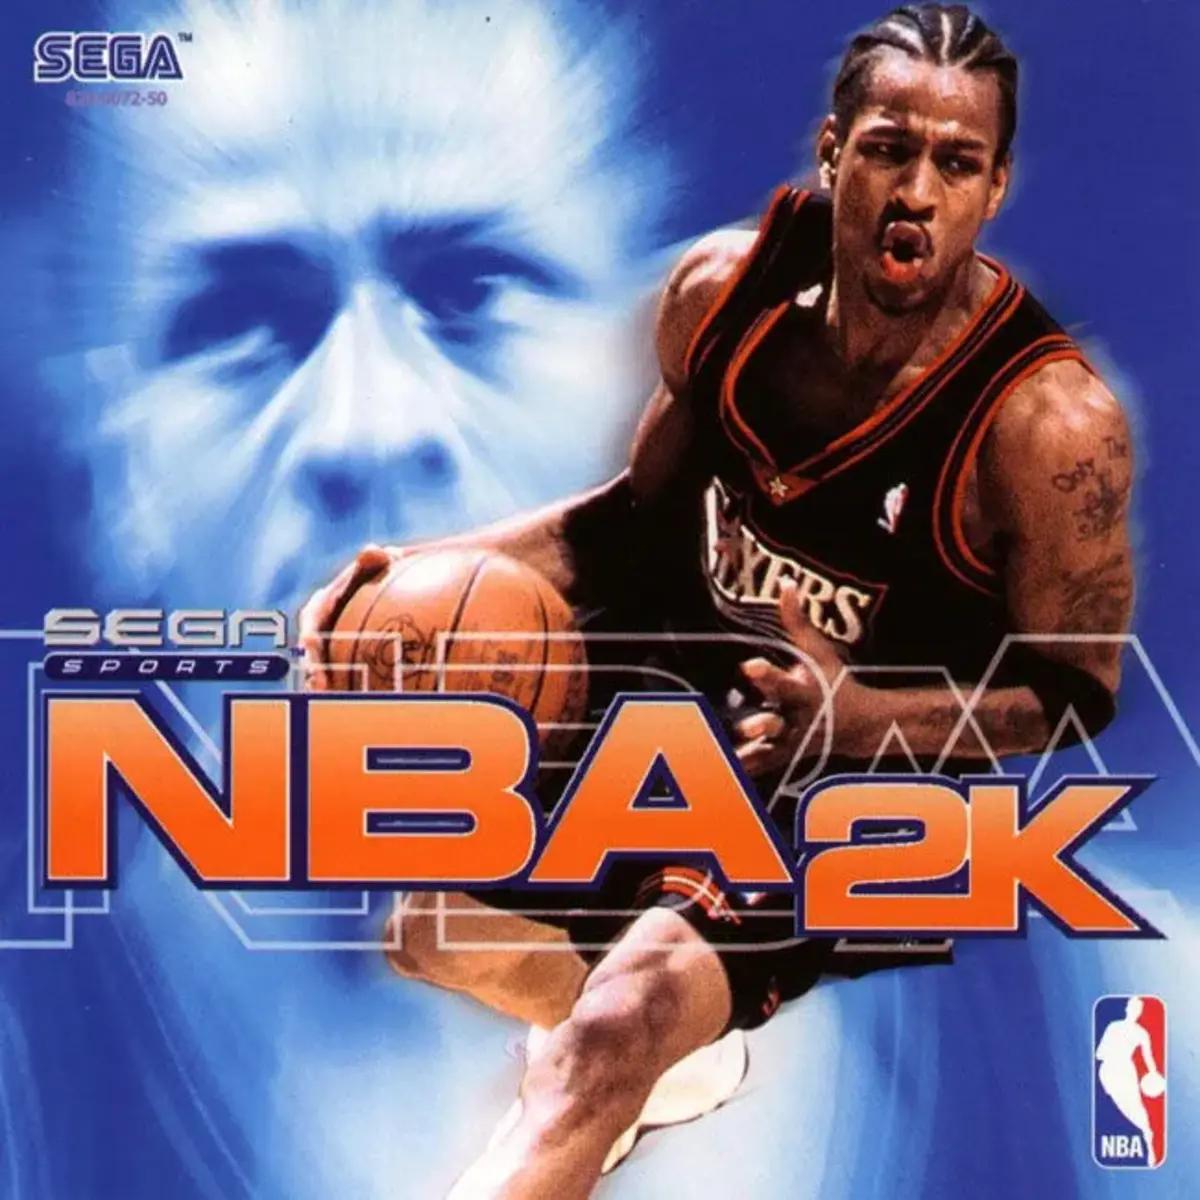 Allen Iverson on the NBA 2K cover.